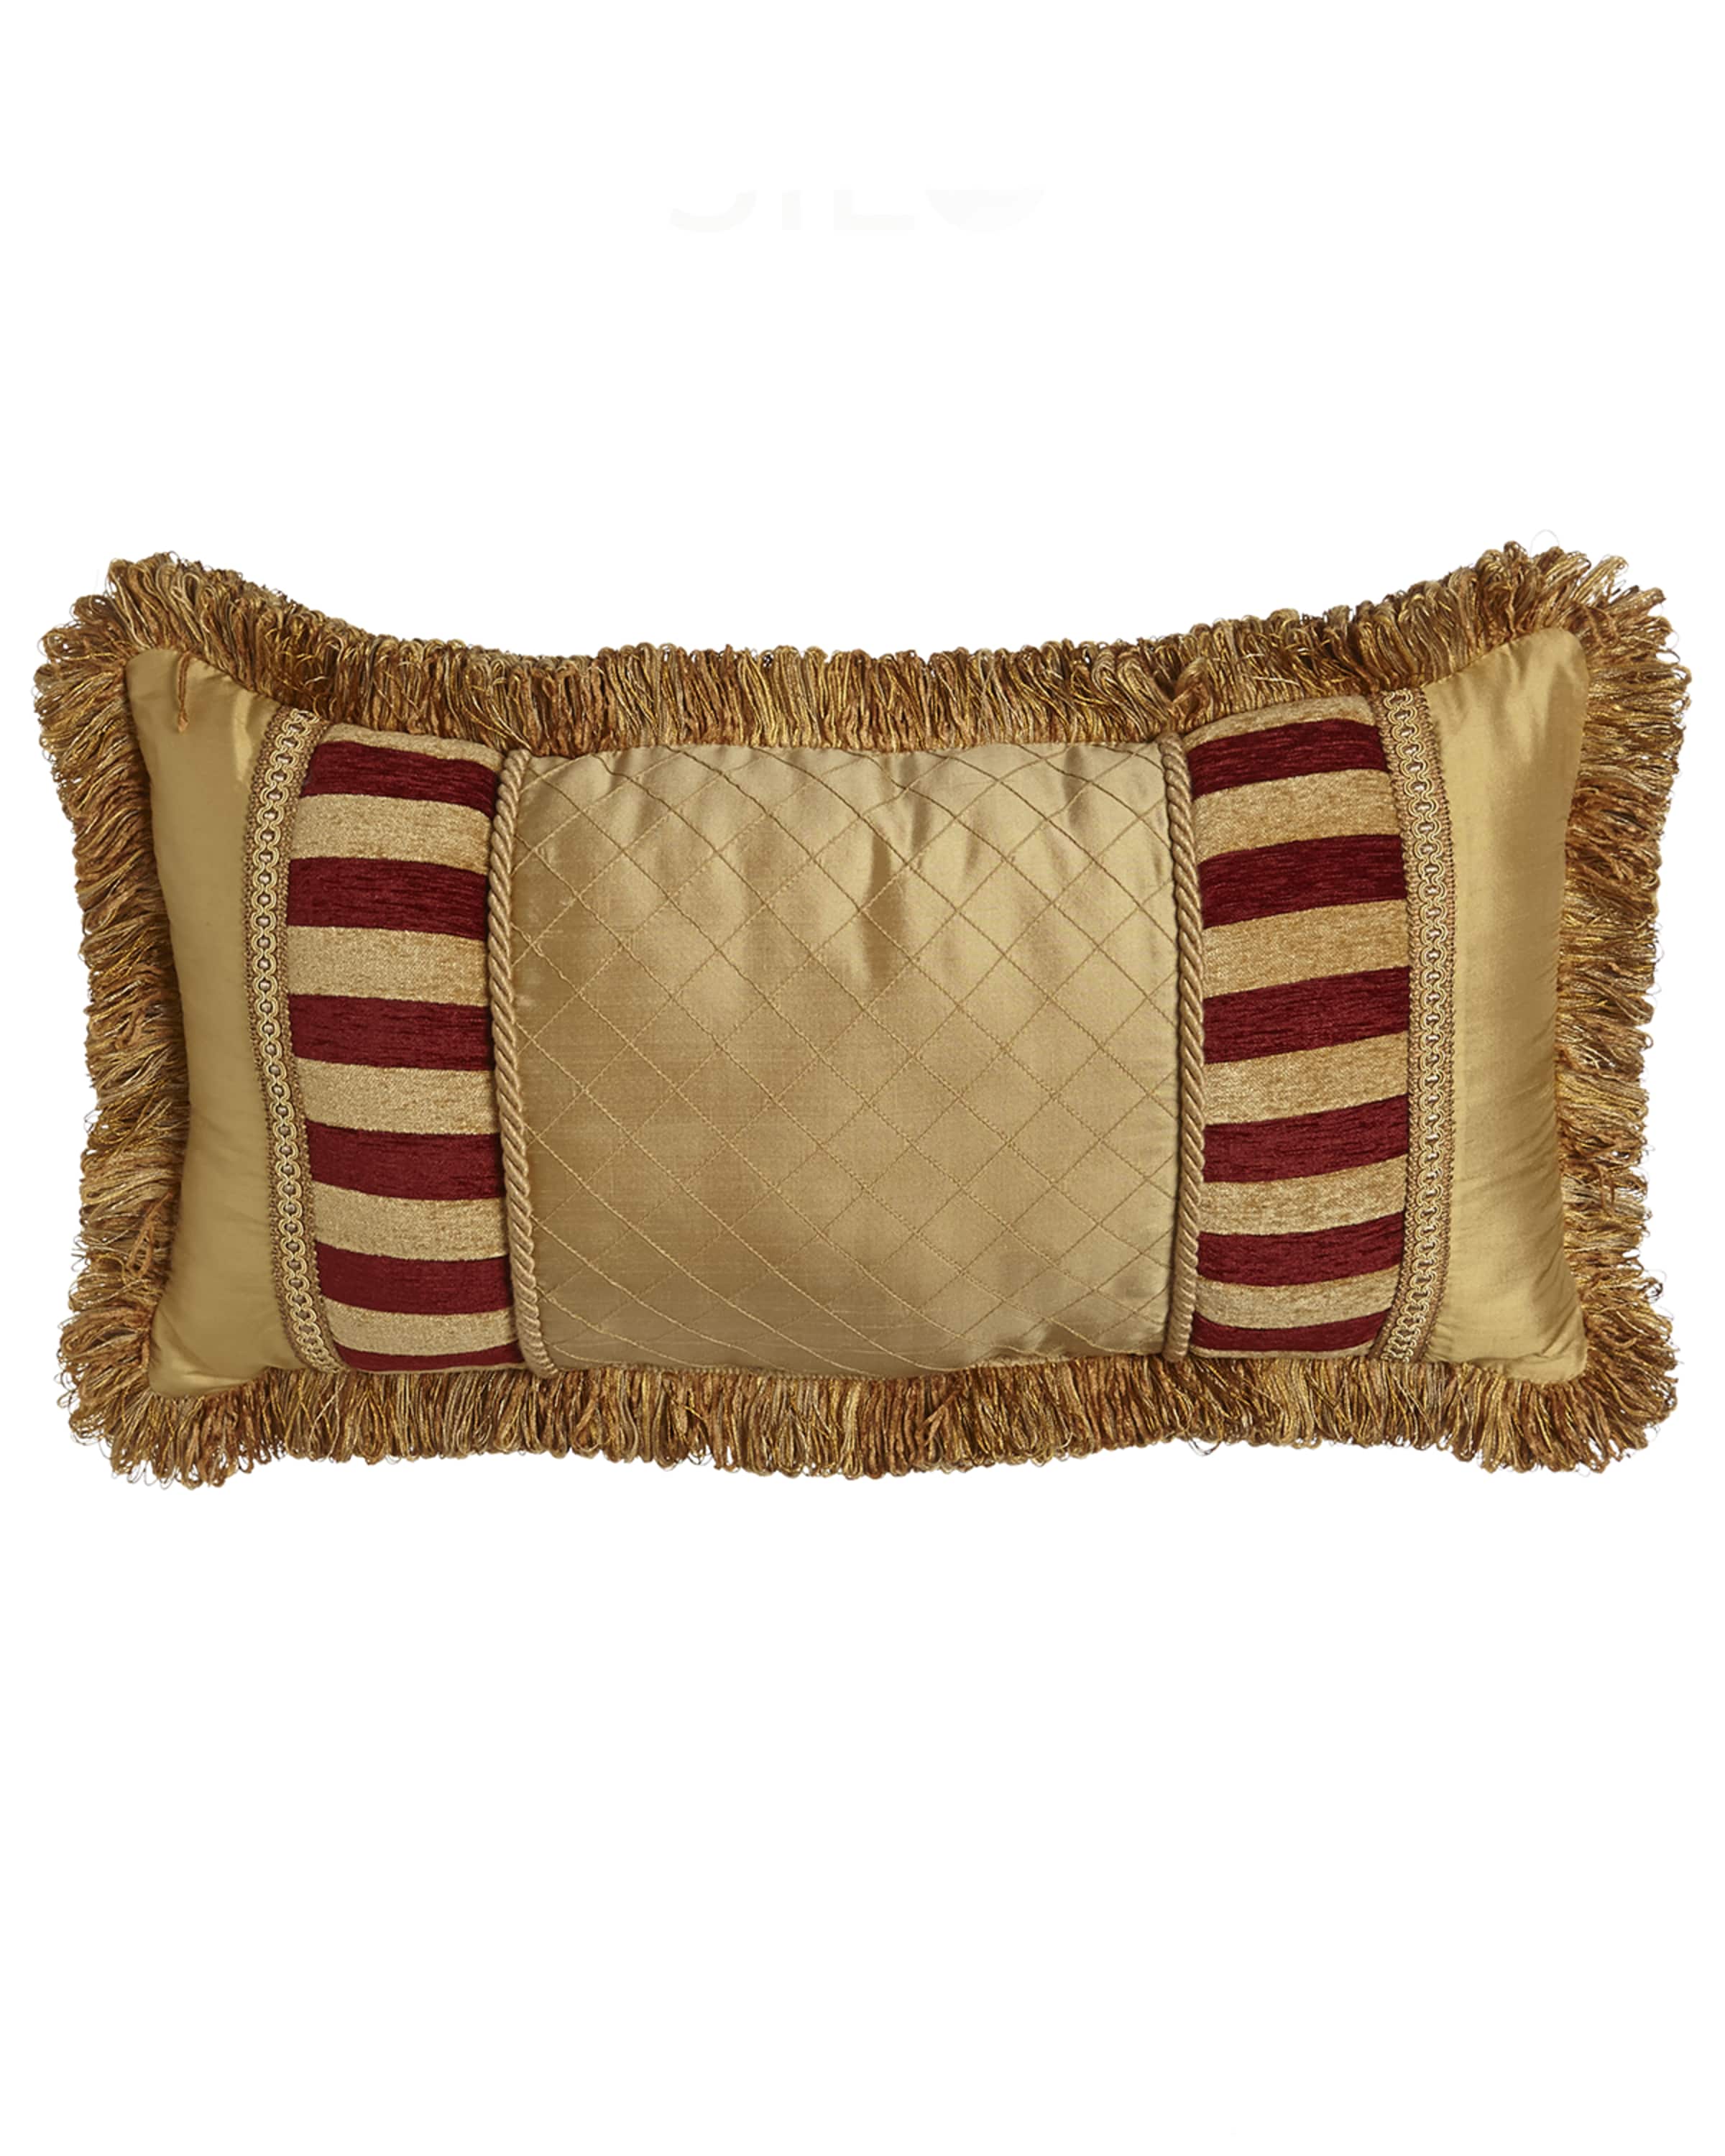 Austin Horn Collection Bellissimo Pieced Pillow with Fringe, 13" x 24"